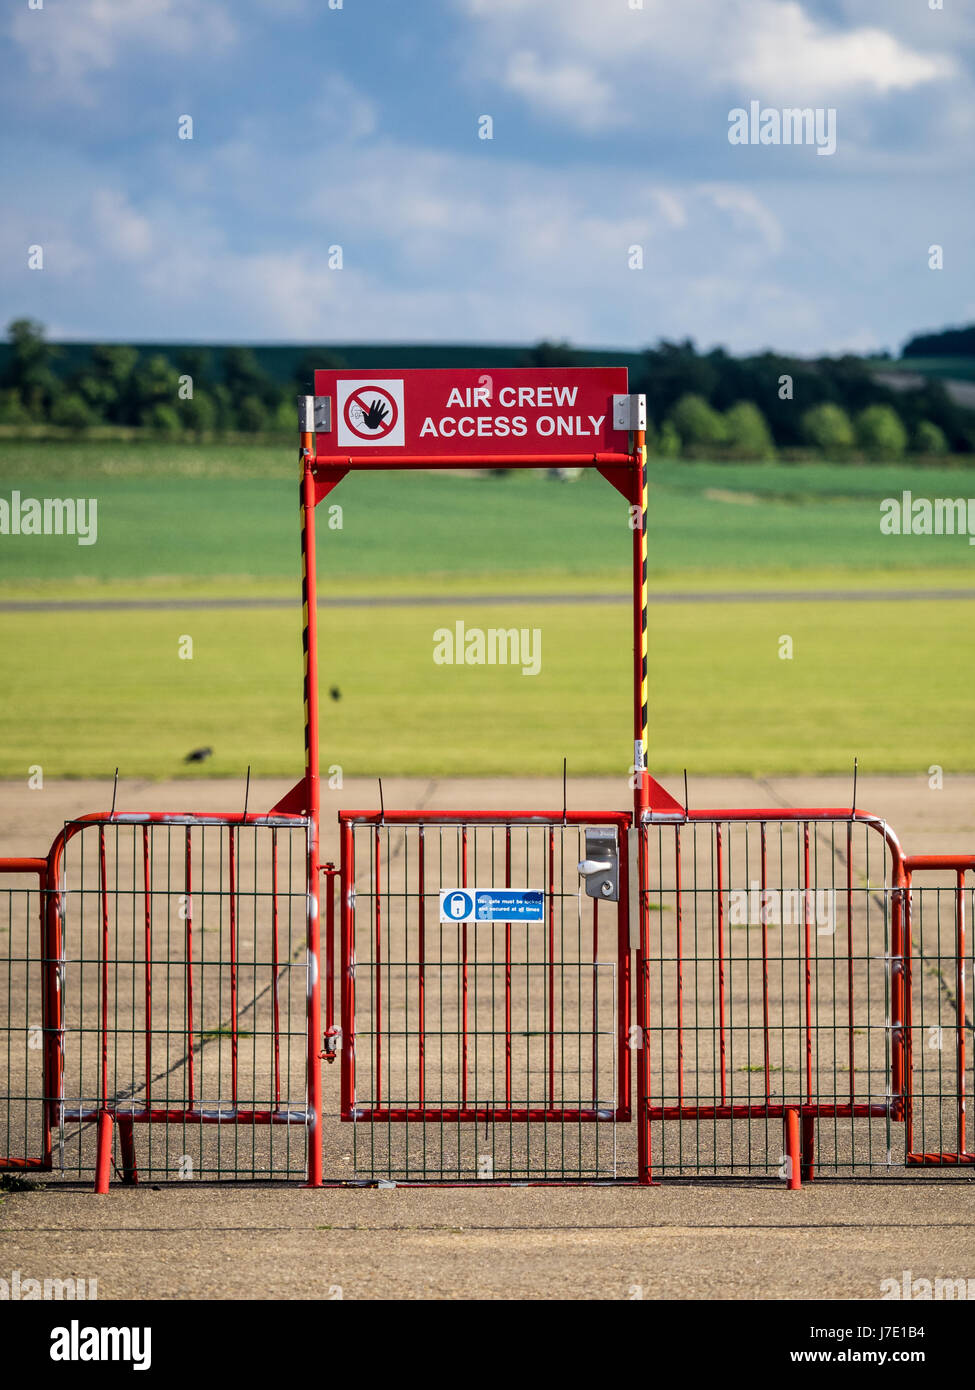 Access gate for aircrew only at a small airfield in Cambridgeshire, UK Stock Photo